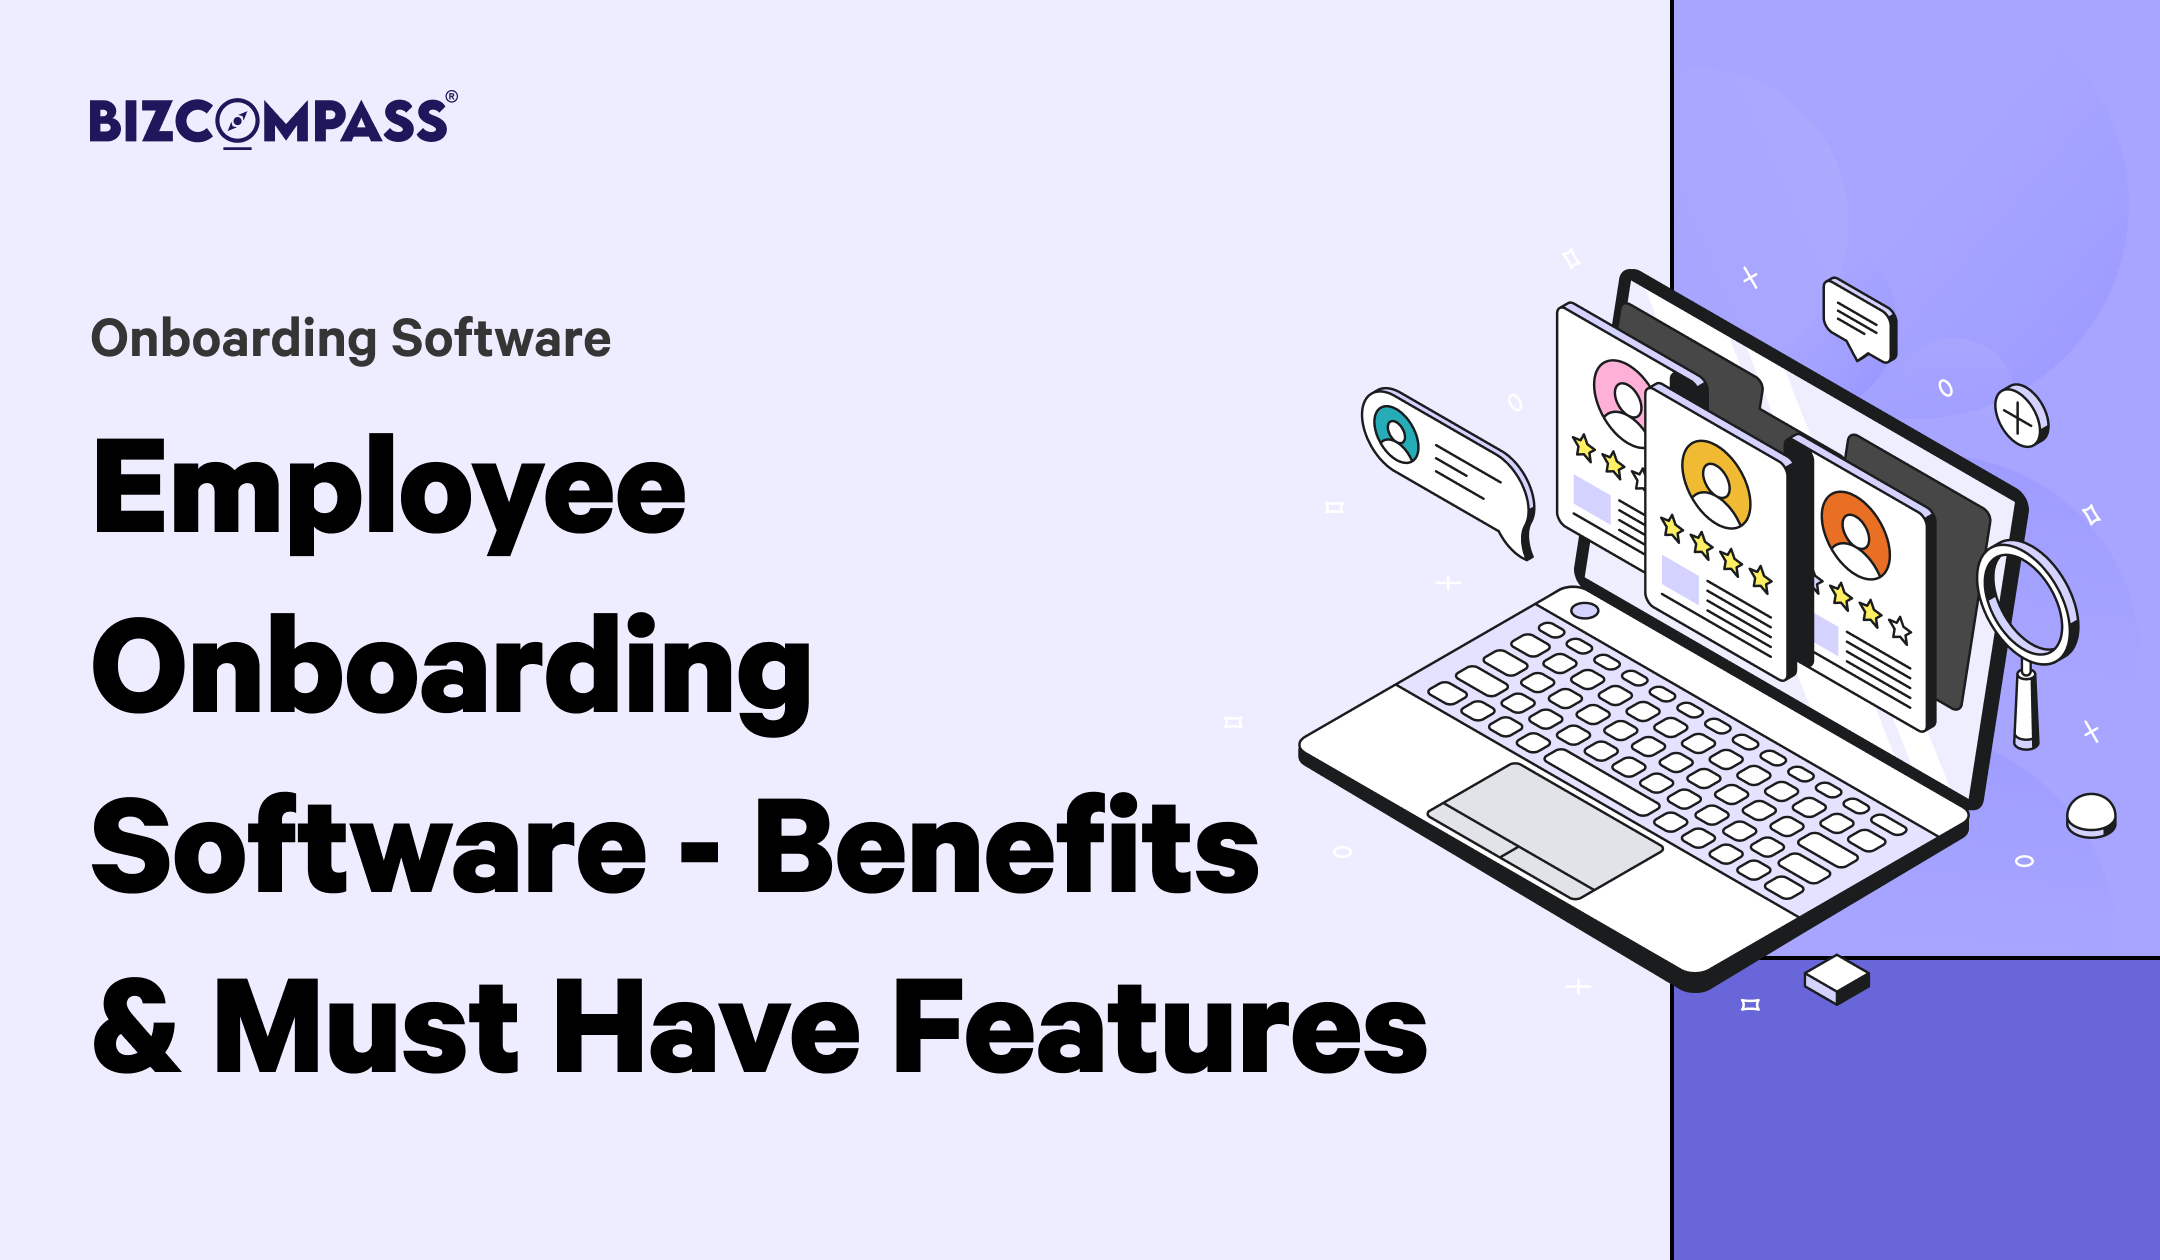 Employee Onboarding Software - Benefits and Must have features